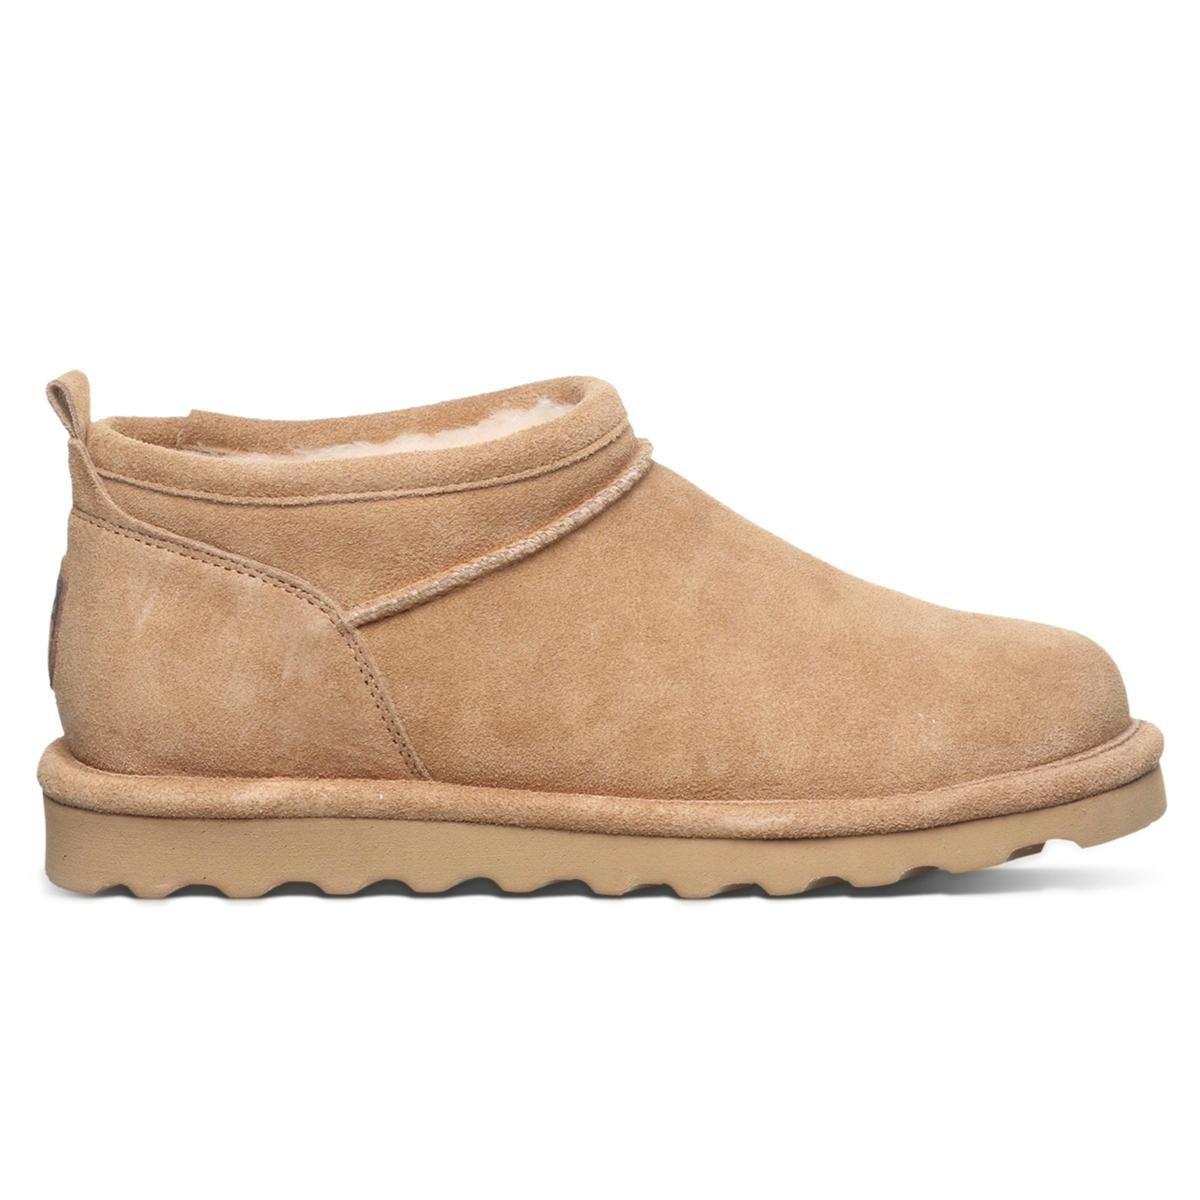 Bearpaw Super Shorty Suede Water- and Stain-Repellent Bootie | HSN